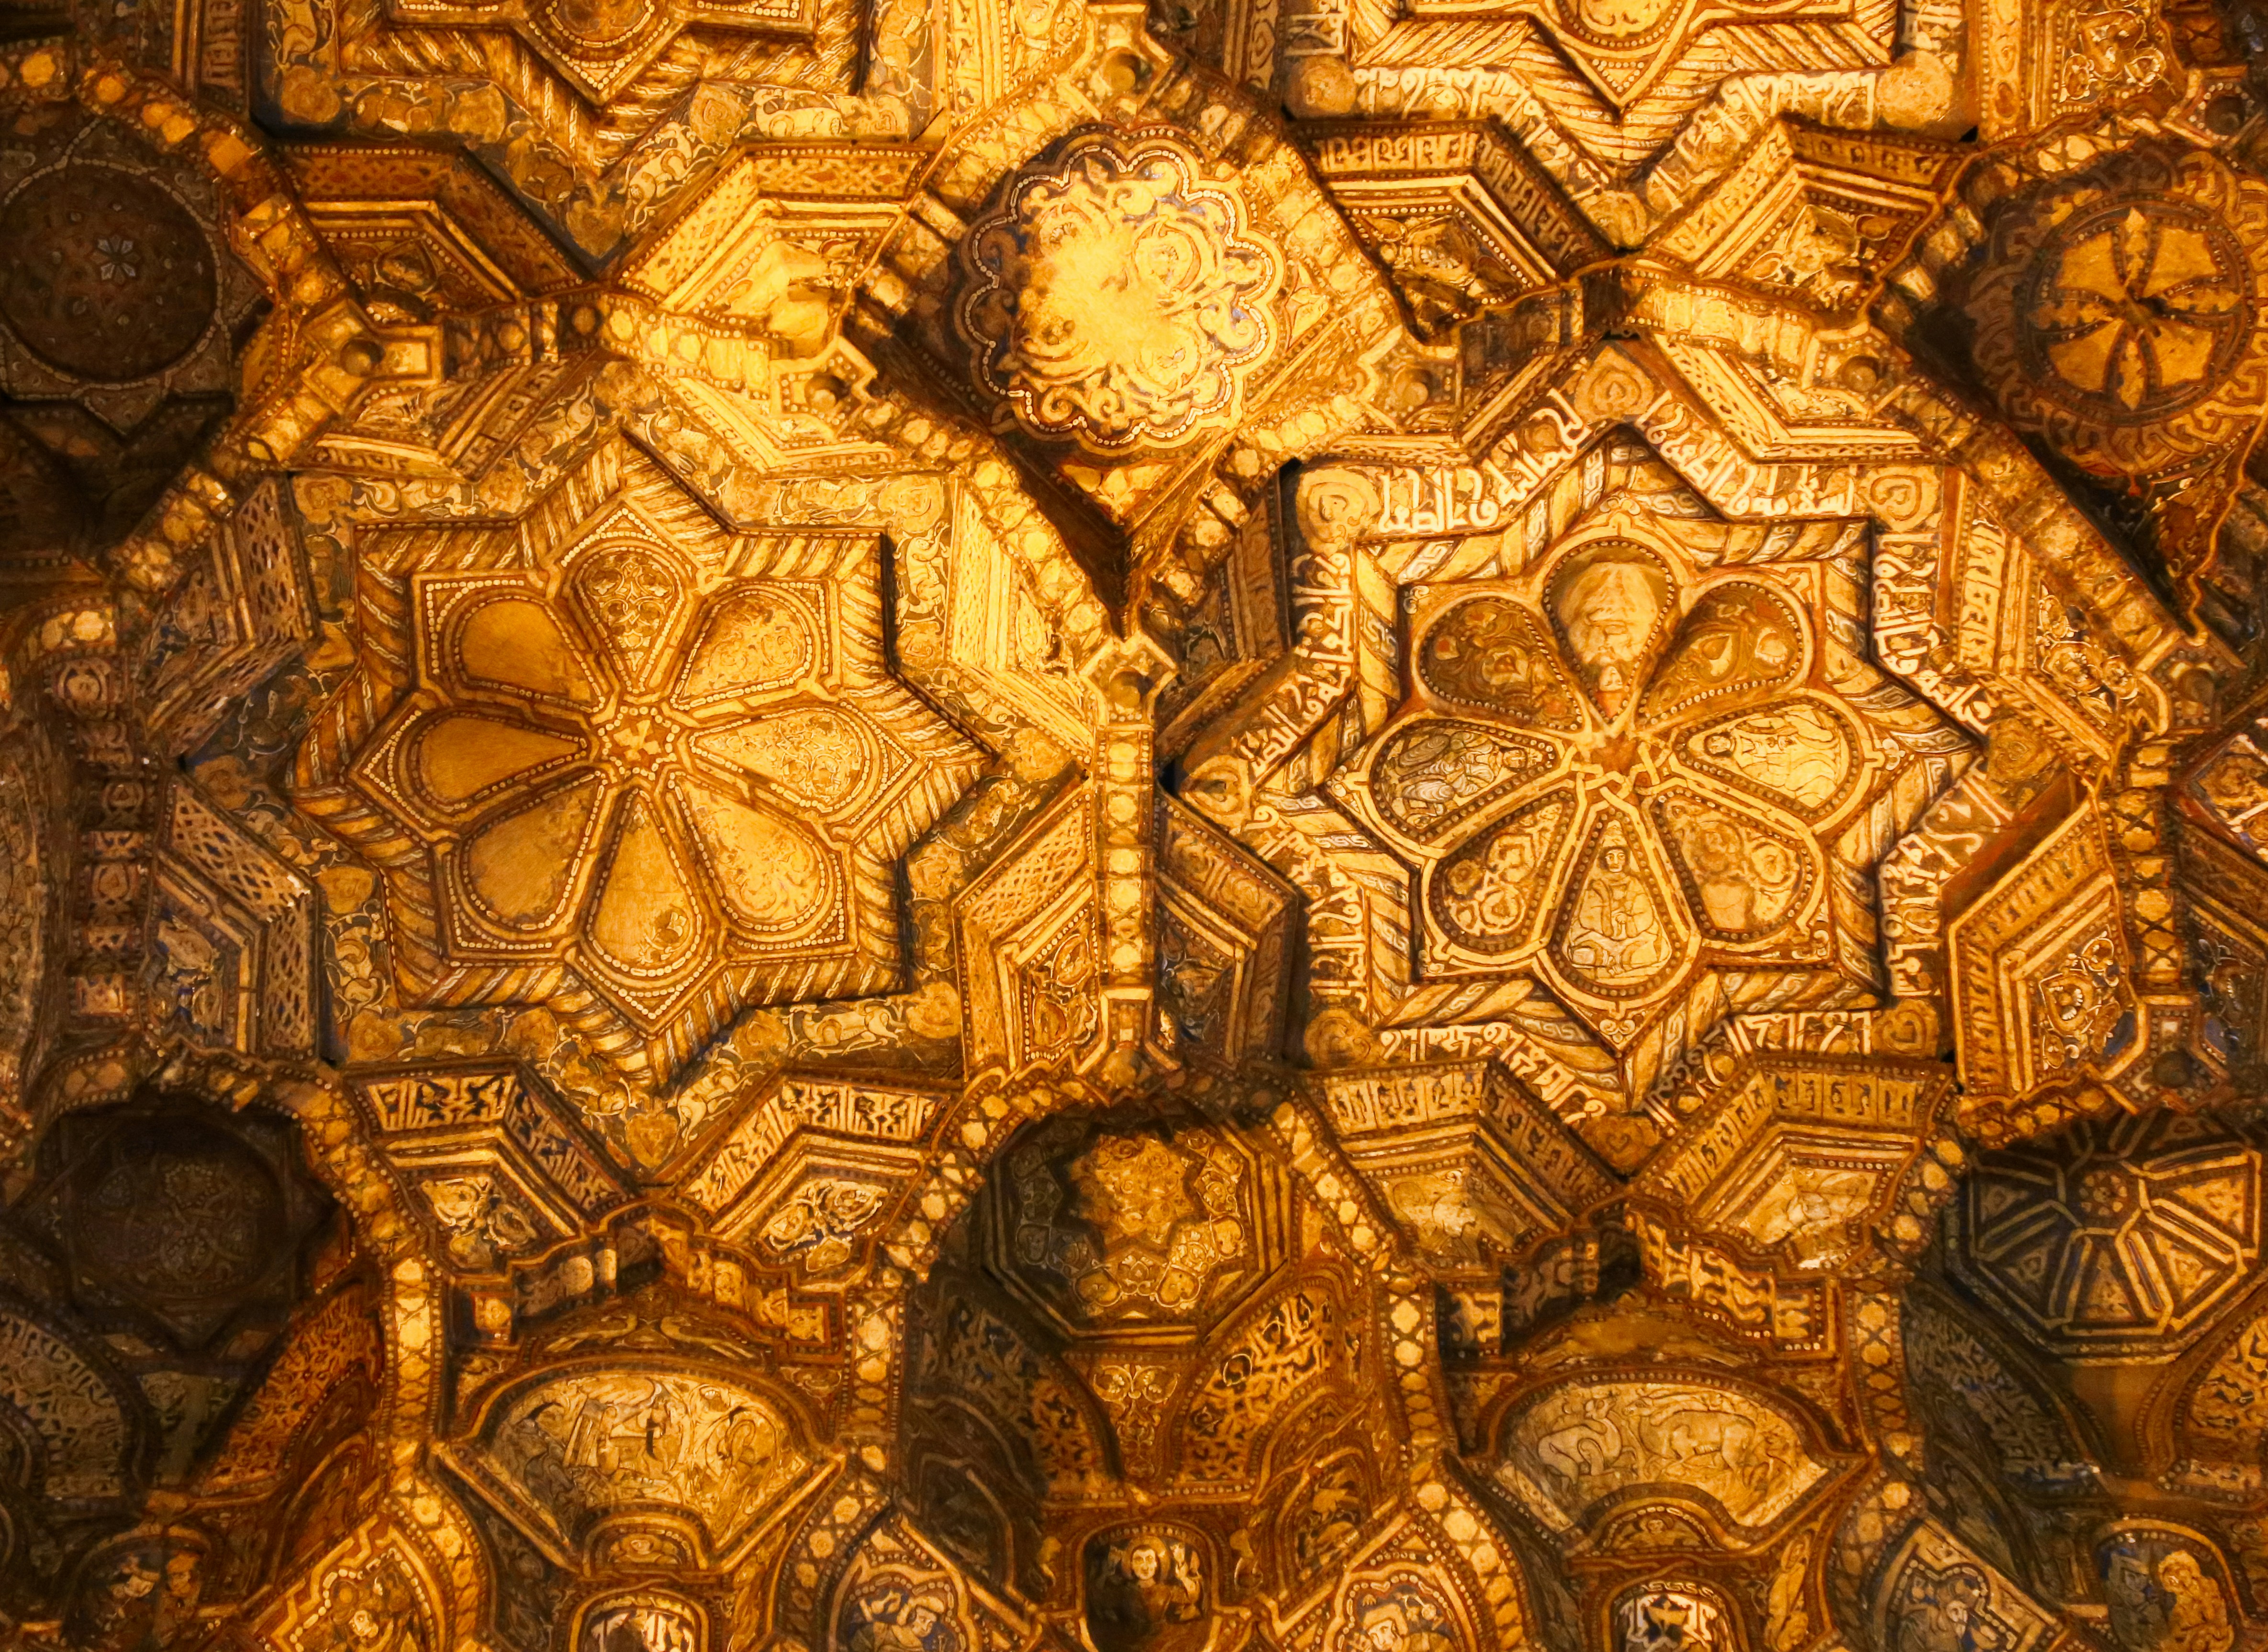 This image features a close-up of an ornate, gilded ceiling with complex geometric patterns and arabesque designs, reflecting a high level of craftsmanship and historic architectural beauty.